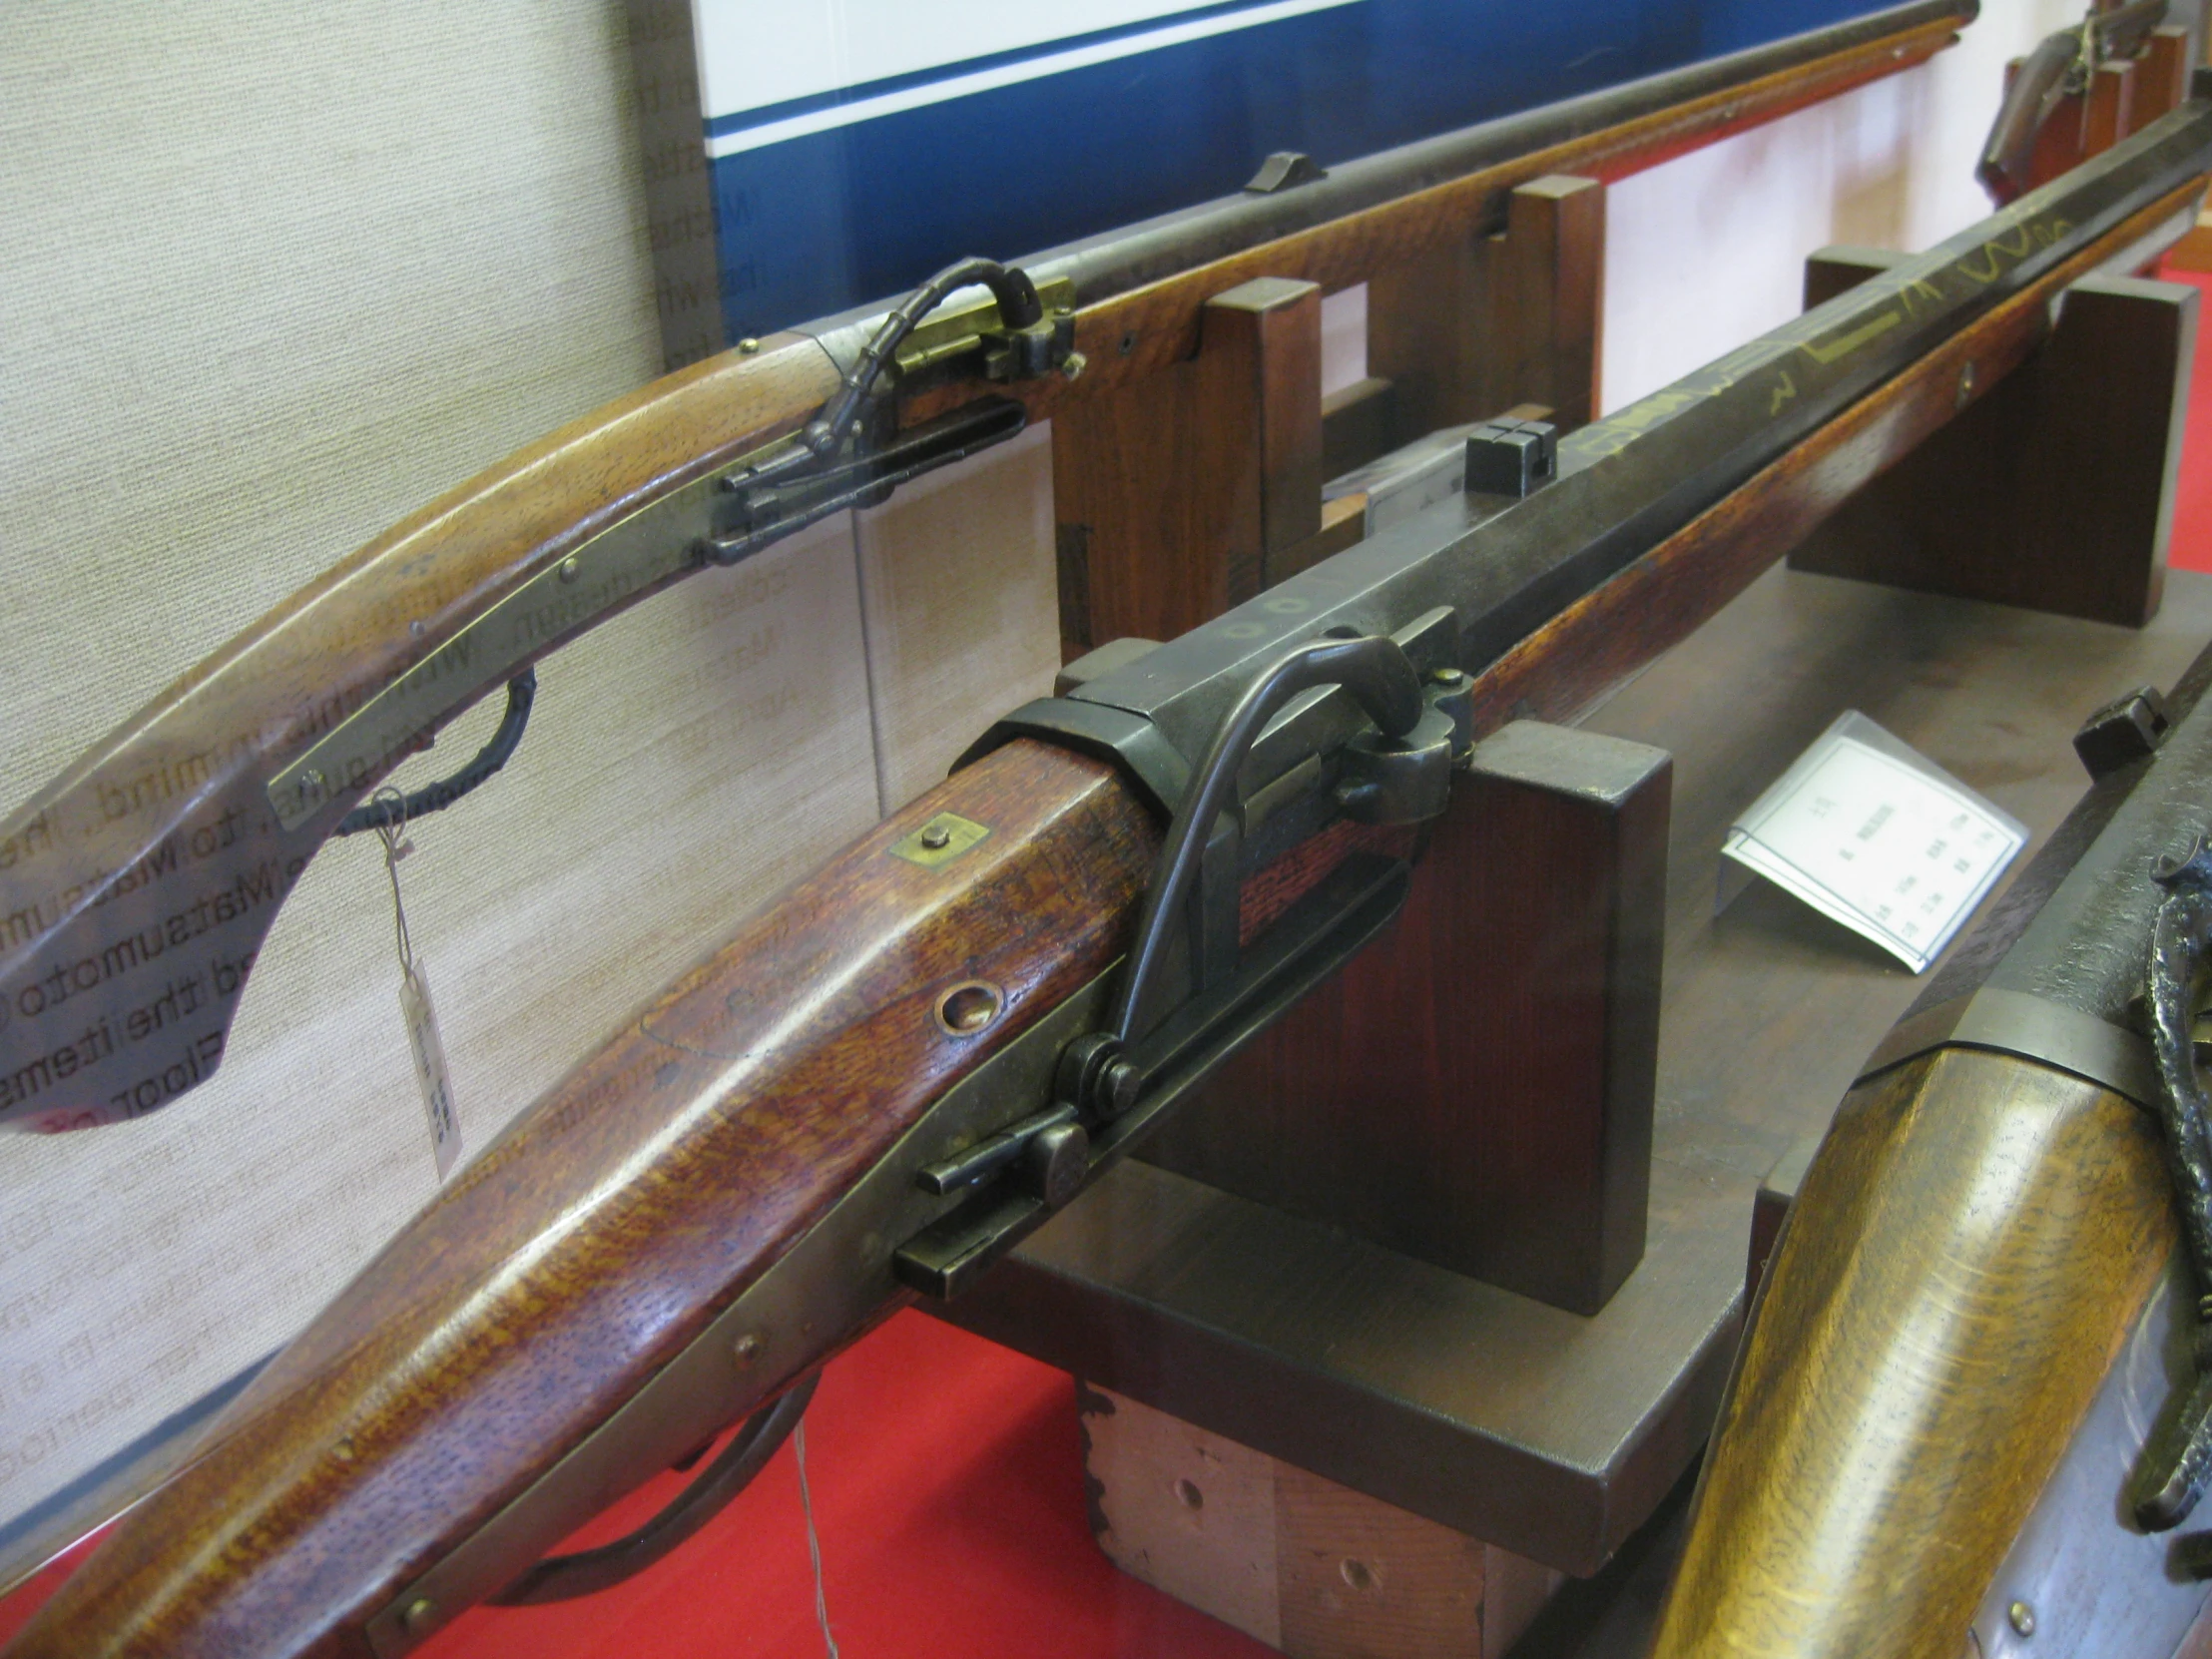 three different types of guns in wooden cases on display